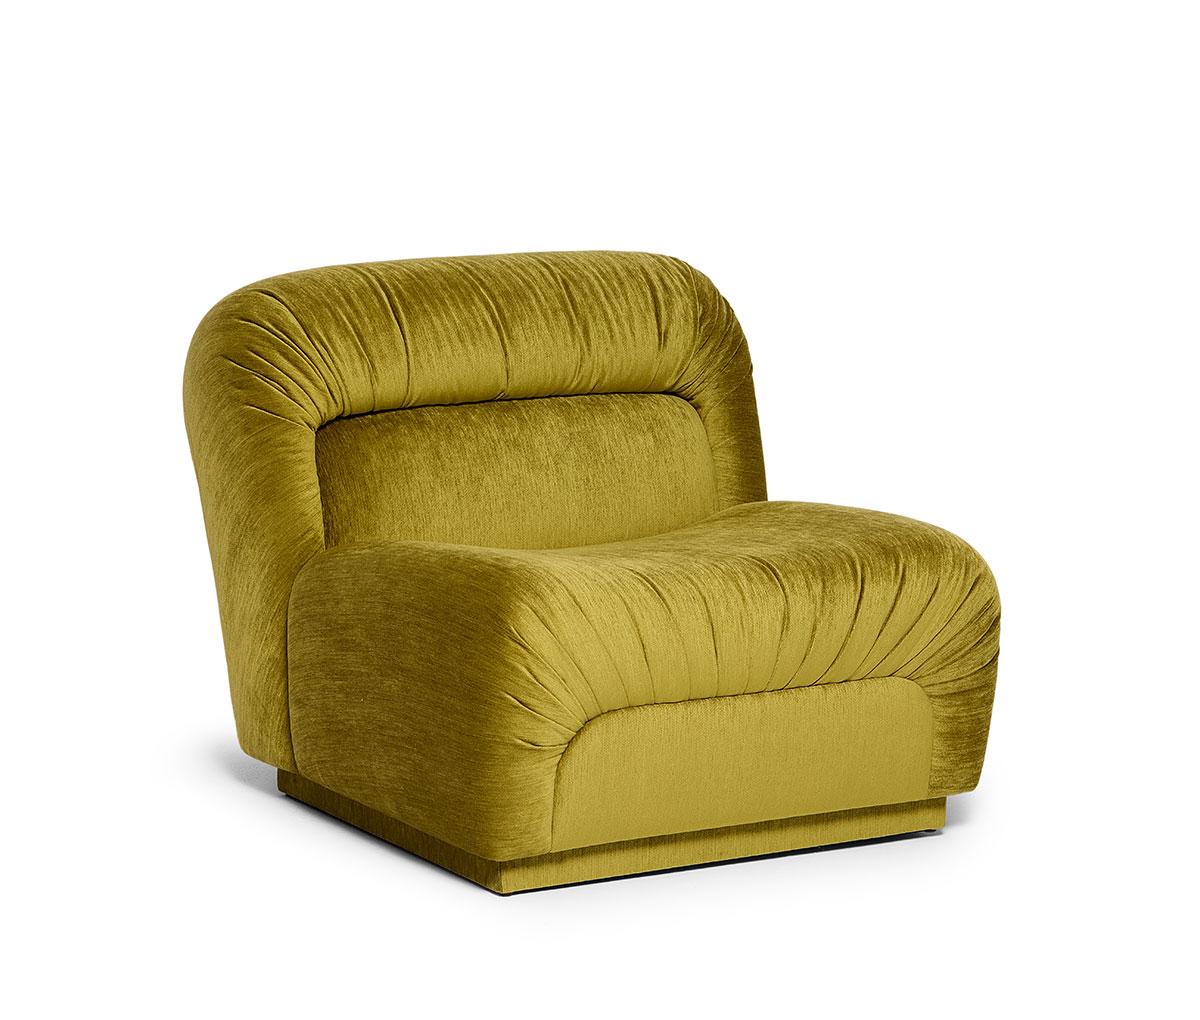 Portuguese Retro Style Armchair With Curved Form and Pleated Details For Sale